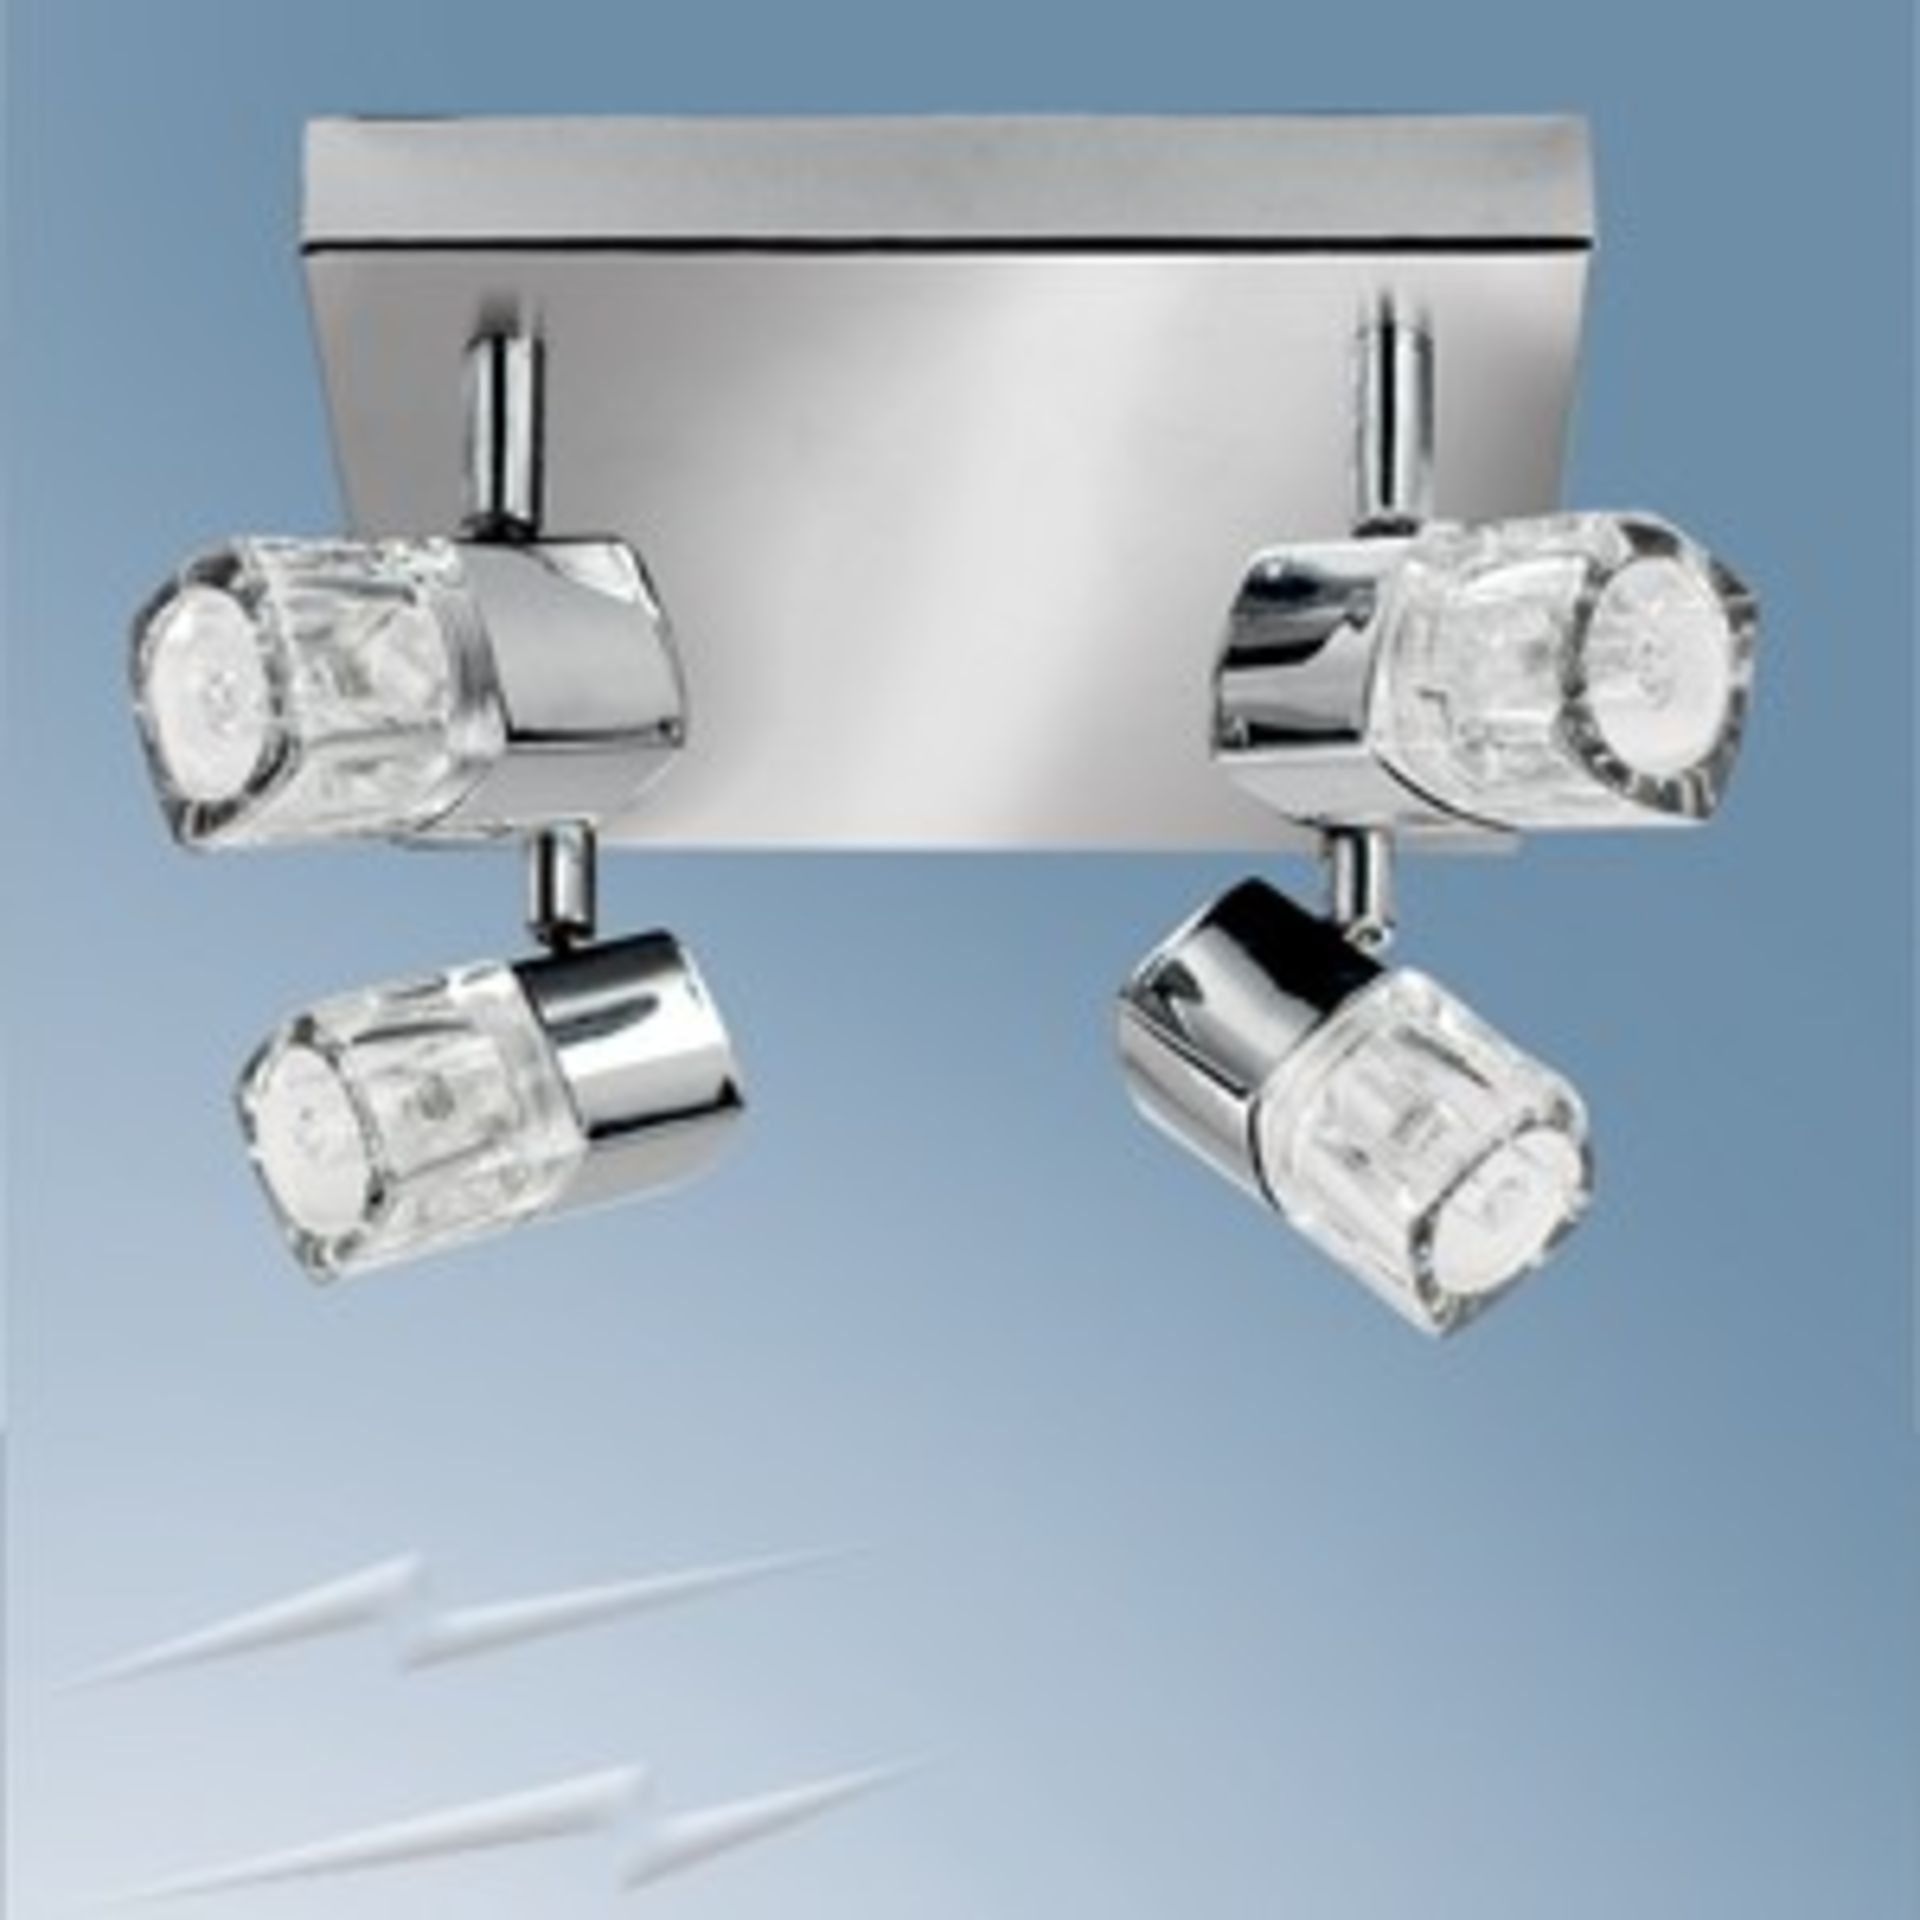 1 x Searchlight 4 LED light Spotlight Square in chrome - Ref: 7884CC - New Boxed Stock RRP: £105.60 - Image 3 of 4